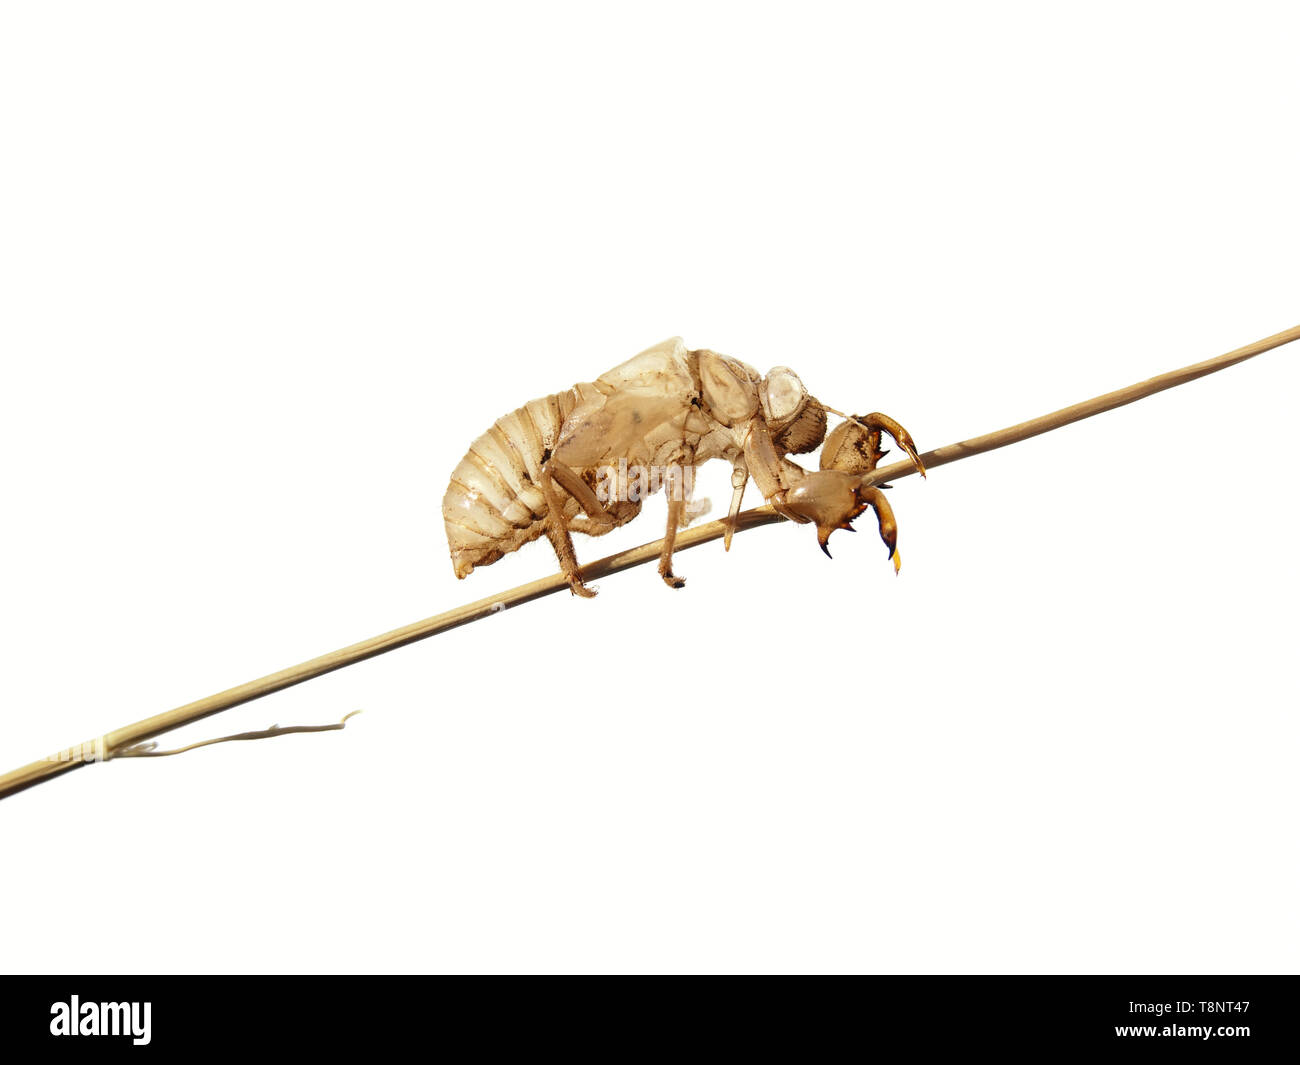 Empty larva after the insect metamorphosis in butterfly on a white background. Stock Photo